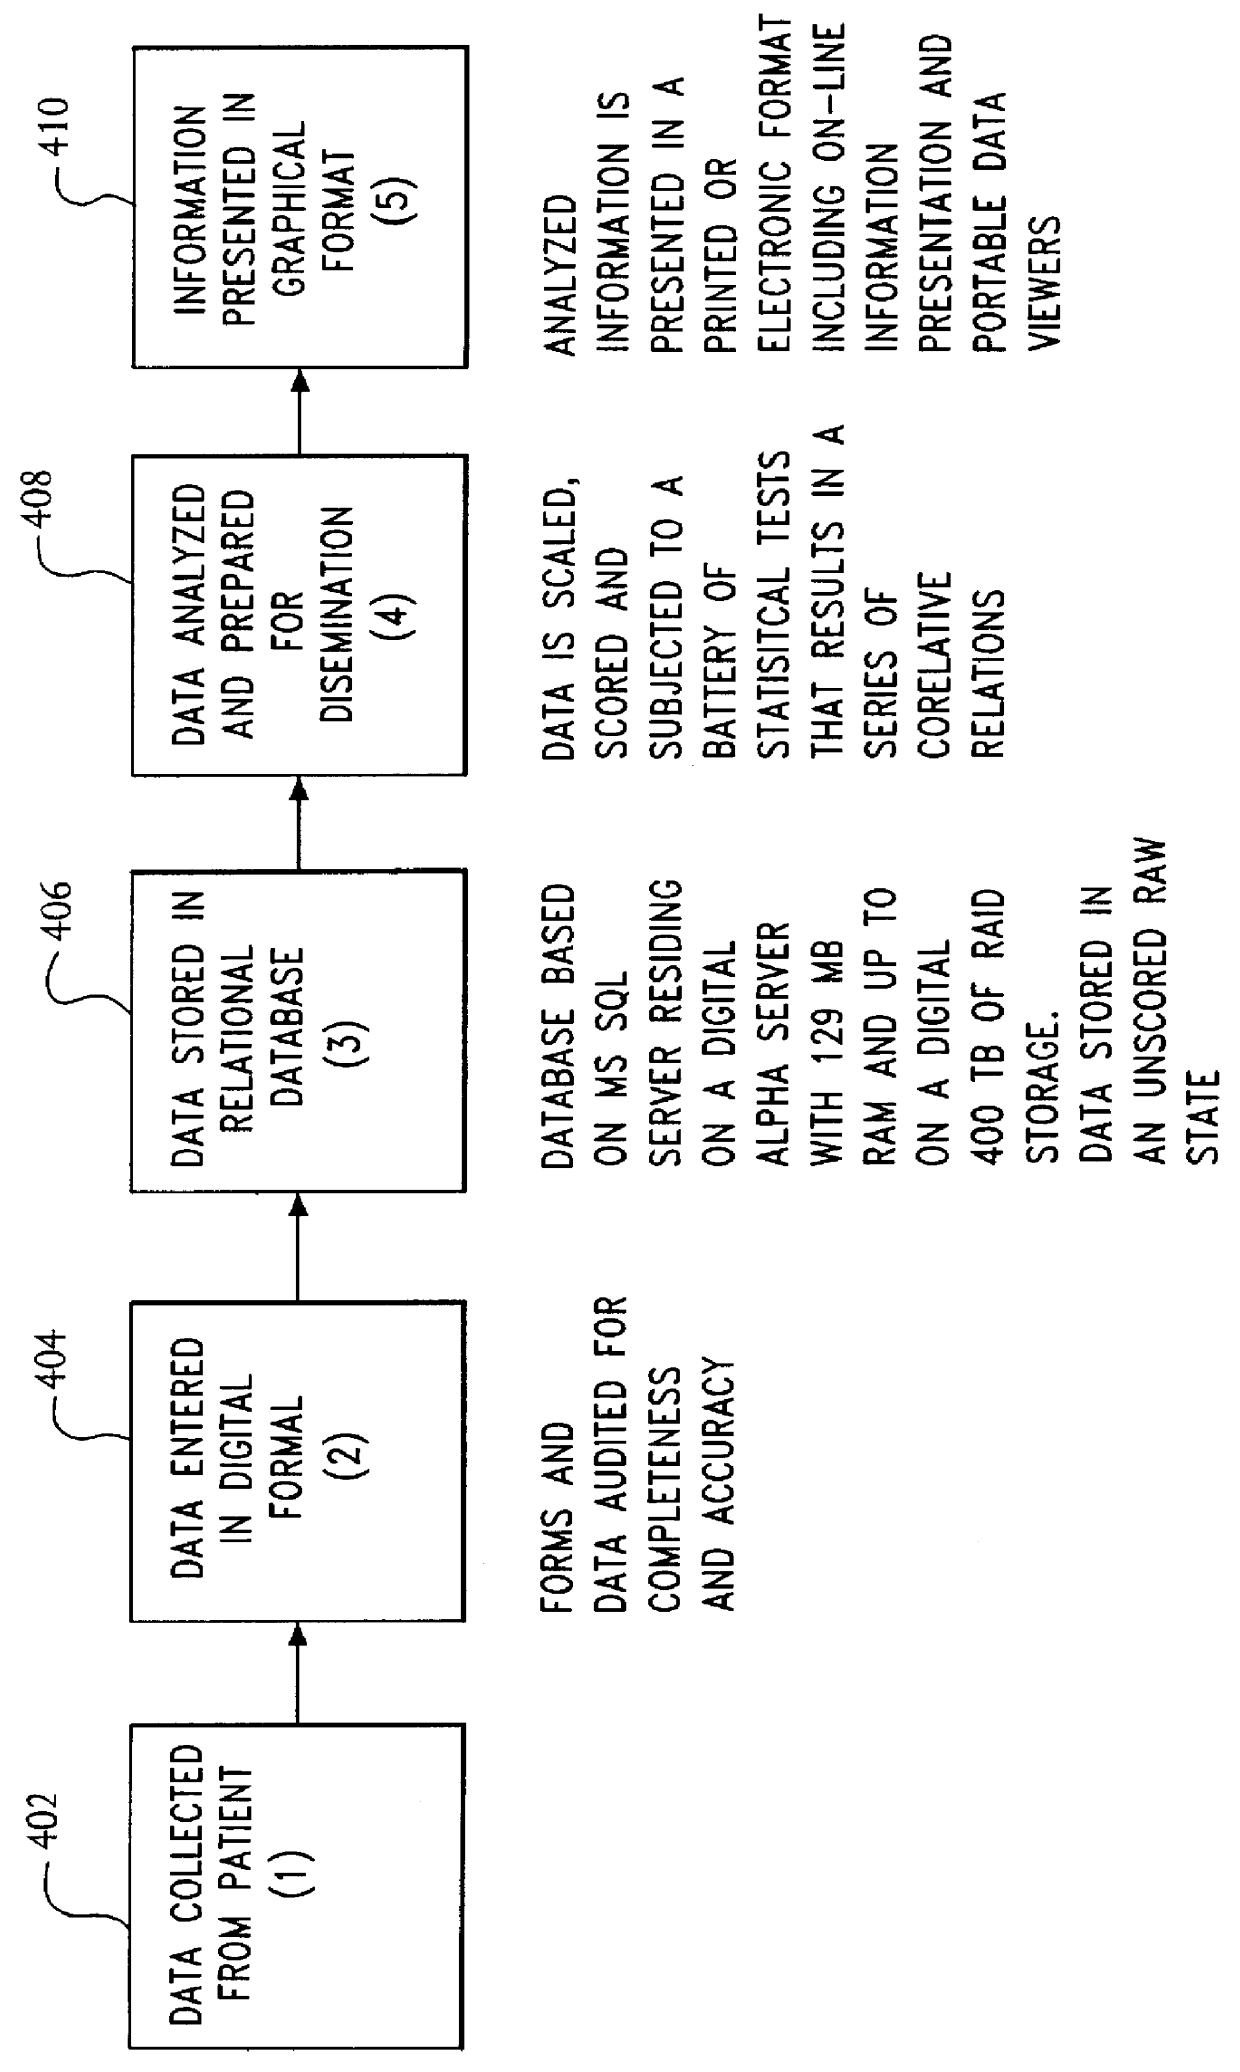 System for and method of collecting and populating a database with physician/patient data for processing to improve practice quality and healthcare delivery